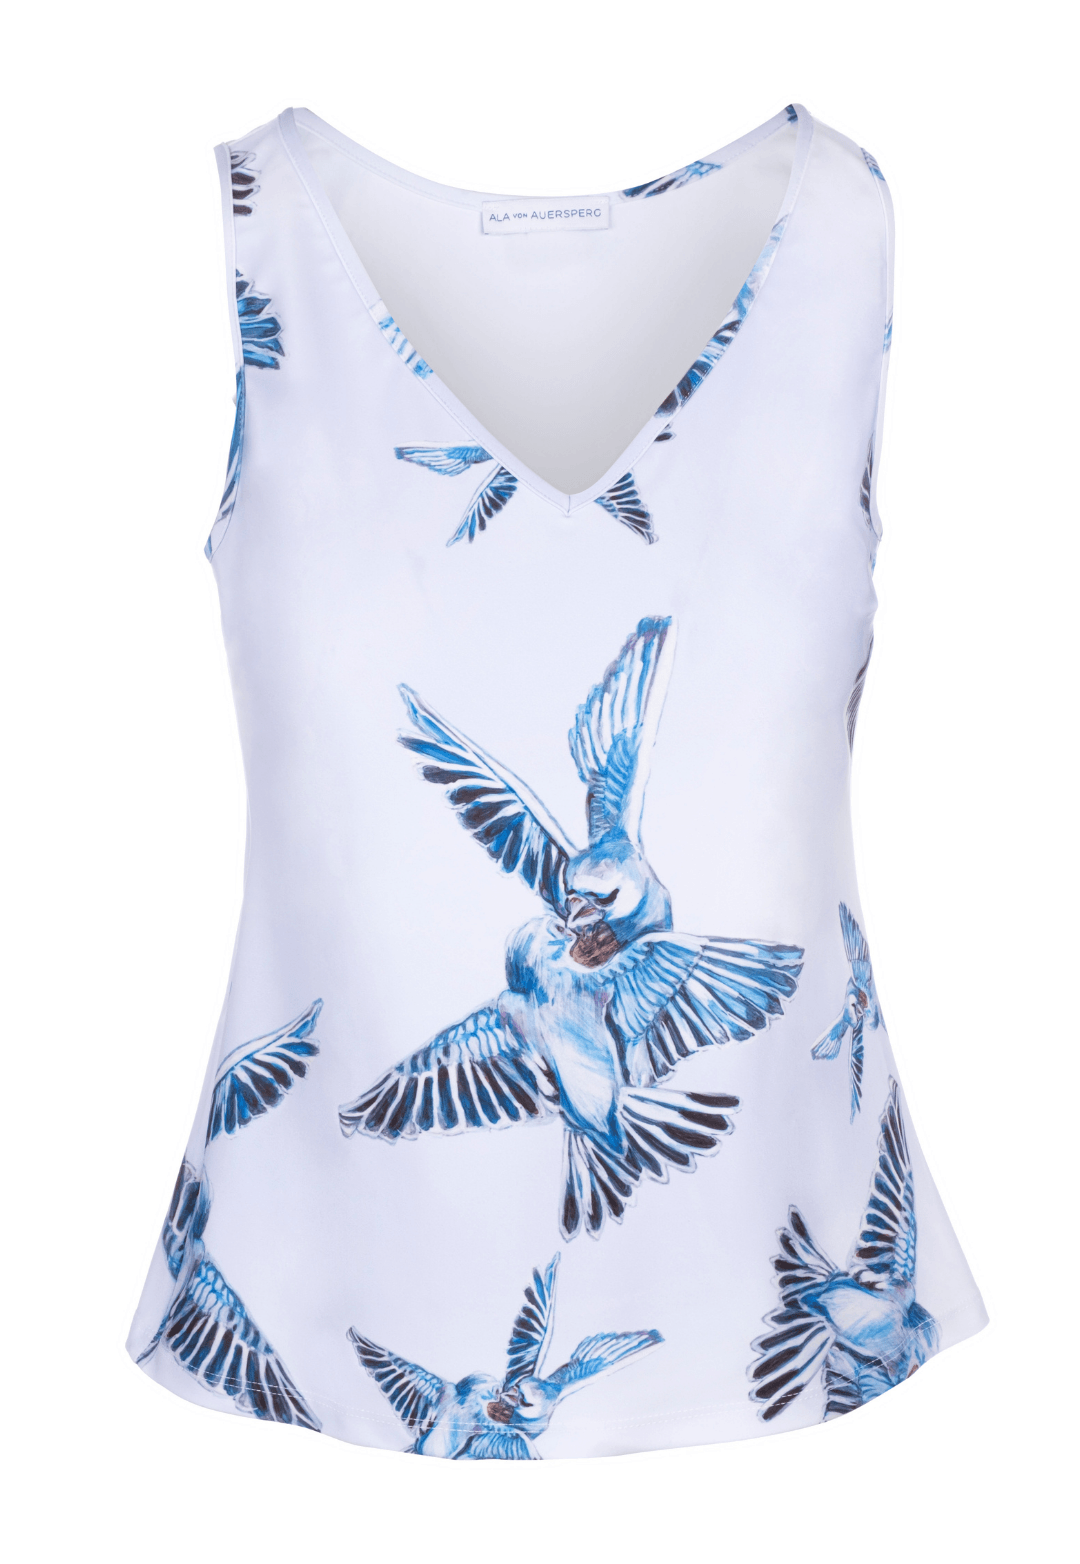 lavender stretch knit tank top with blue birds printed on it by Ala von Auersperg